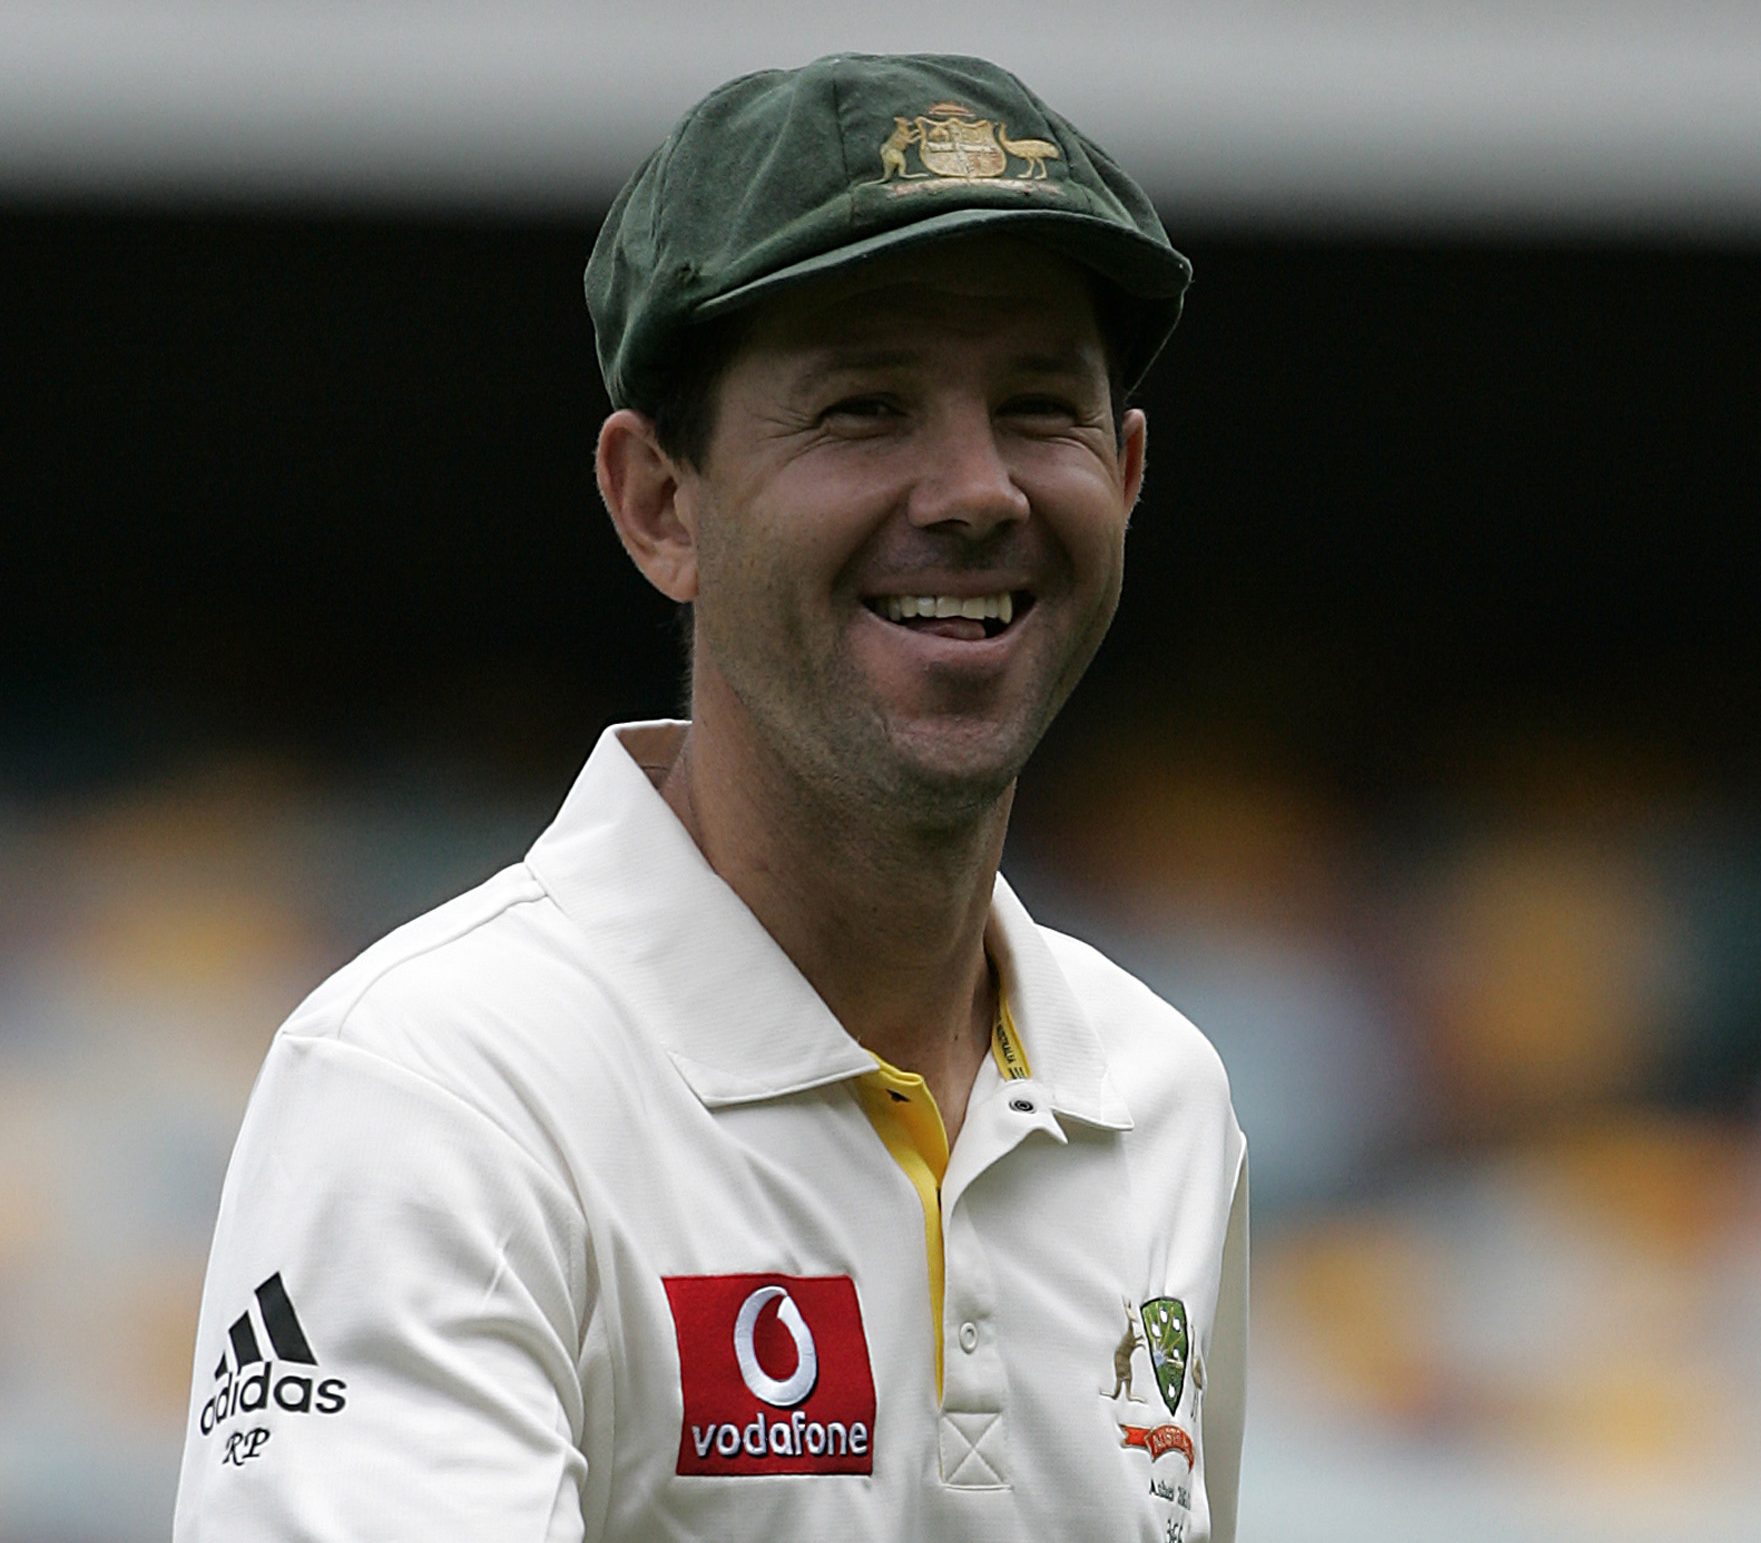 ricky ponting hd images mobile wallpaper download